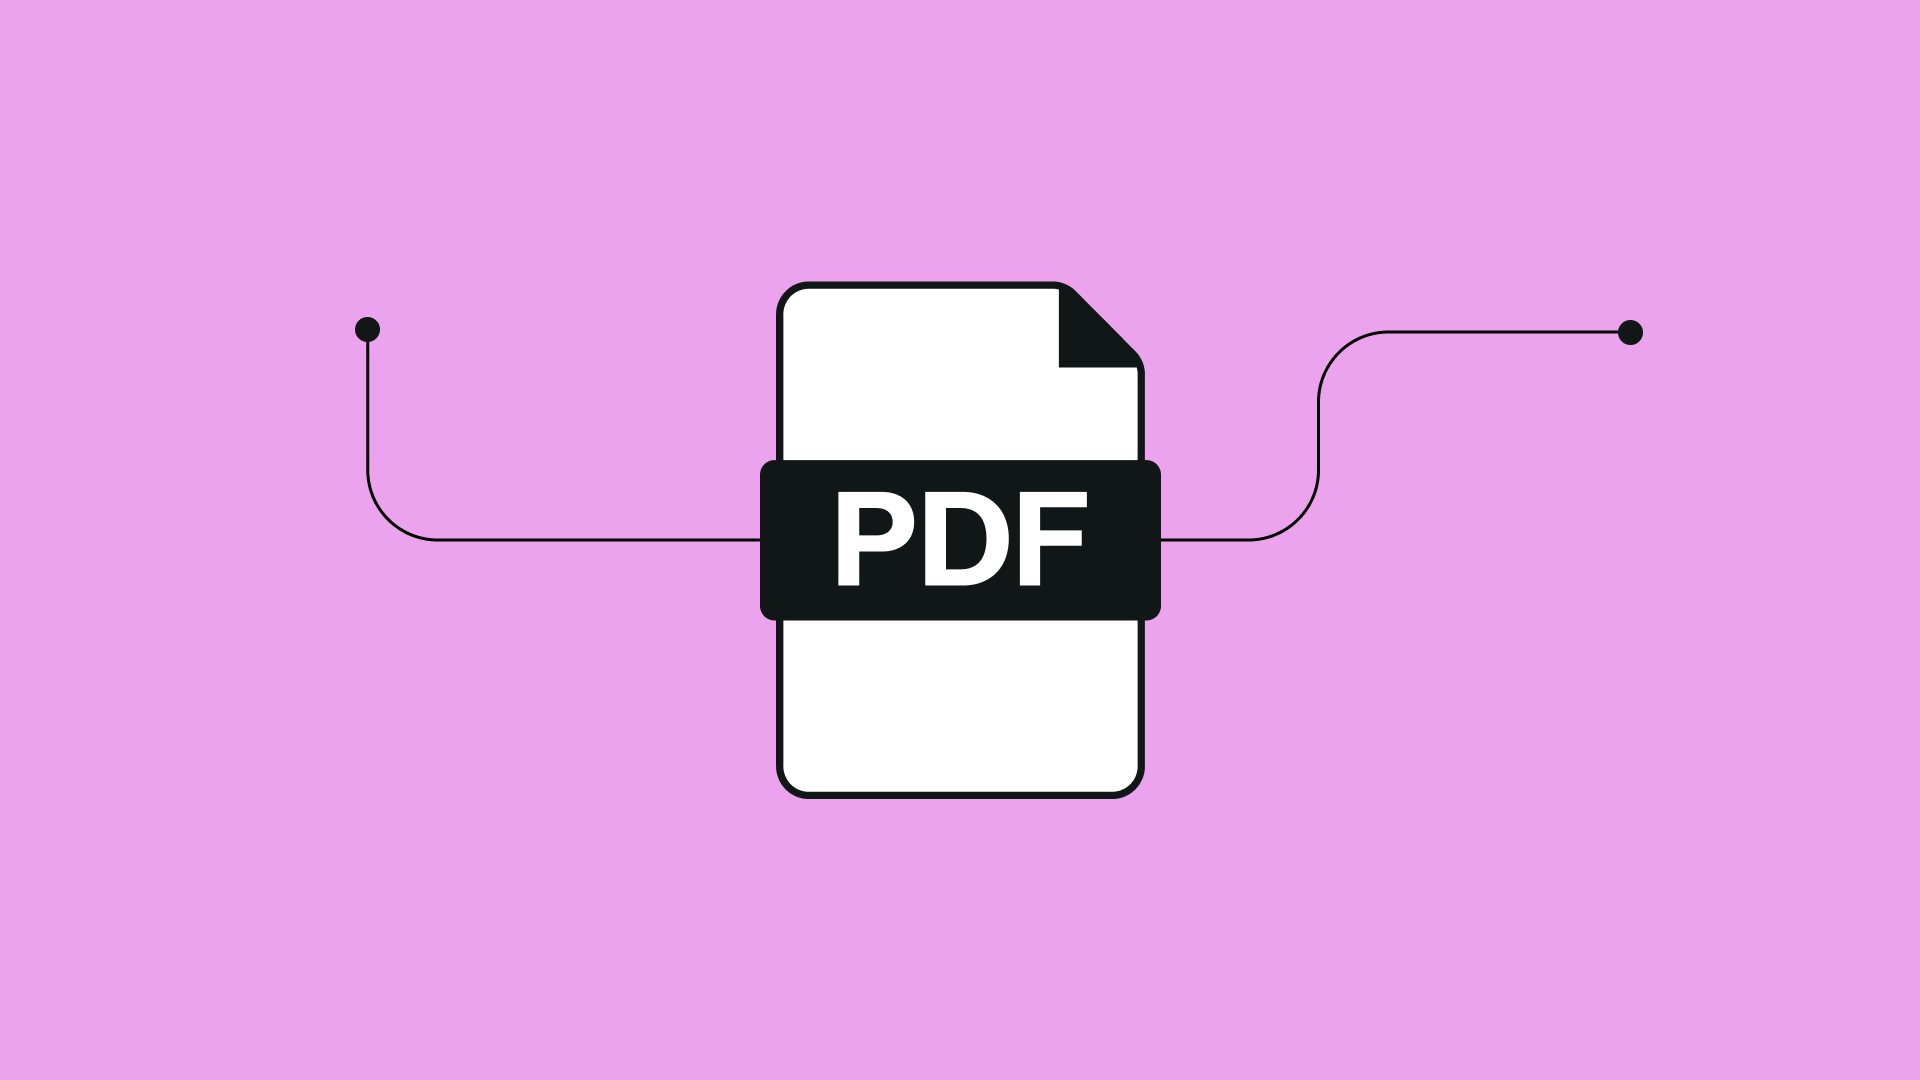 How to edit a PDF on iPhone and iPad | Linearity